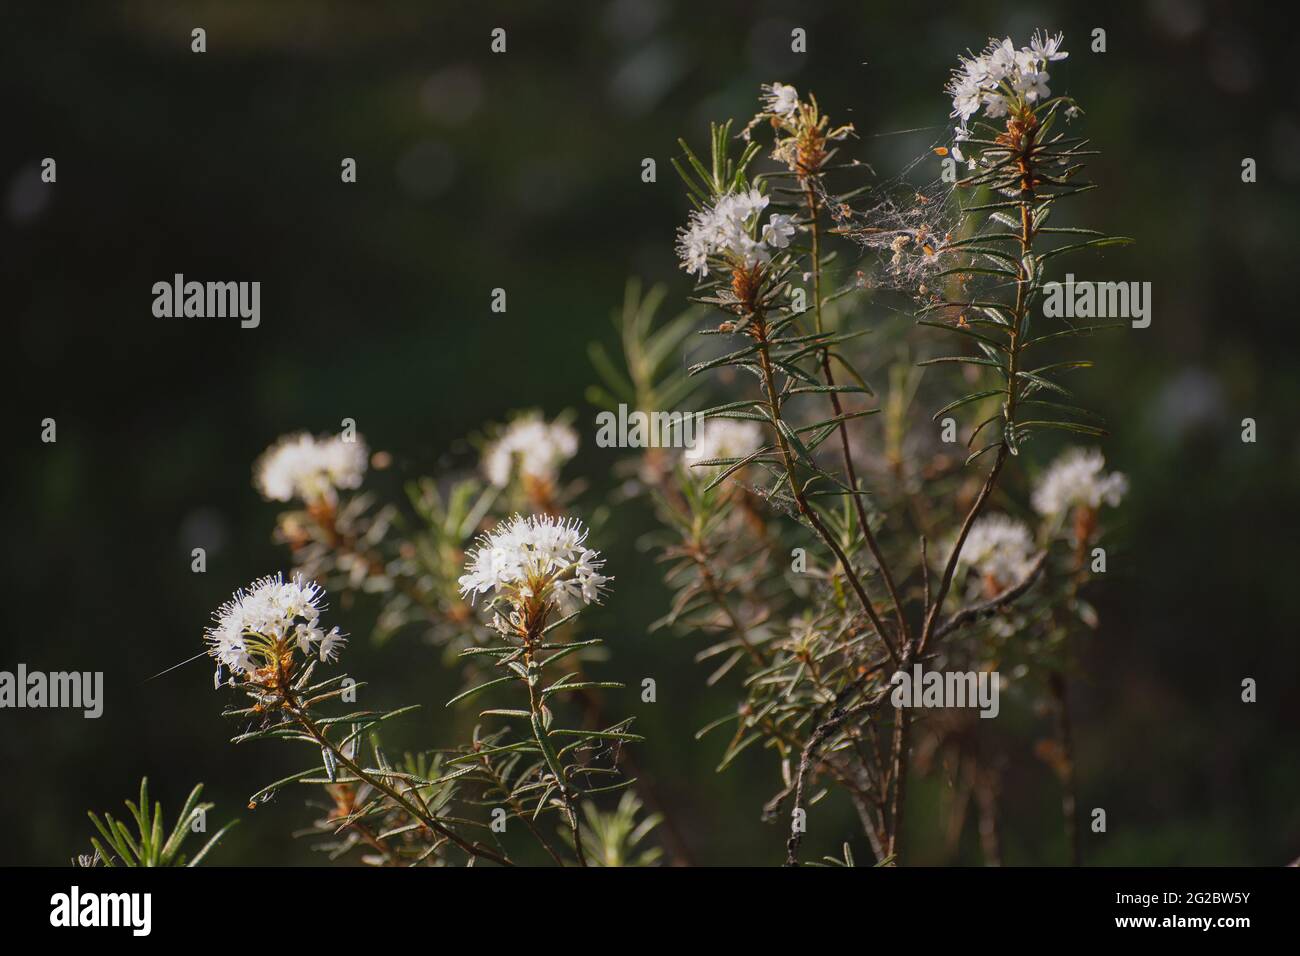 Blooming wild rosemary (Ledum palustre, Rhododendron tomentosum close up Stock Photo